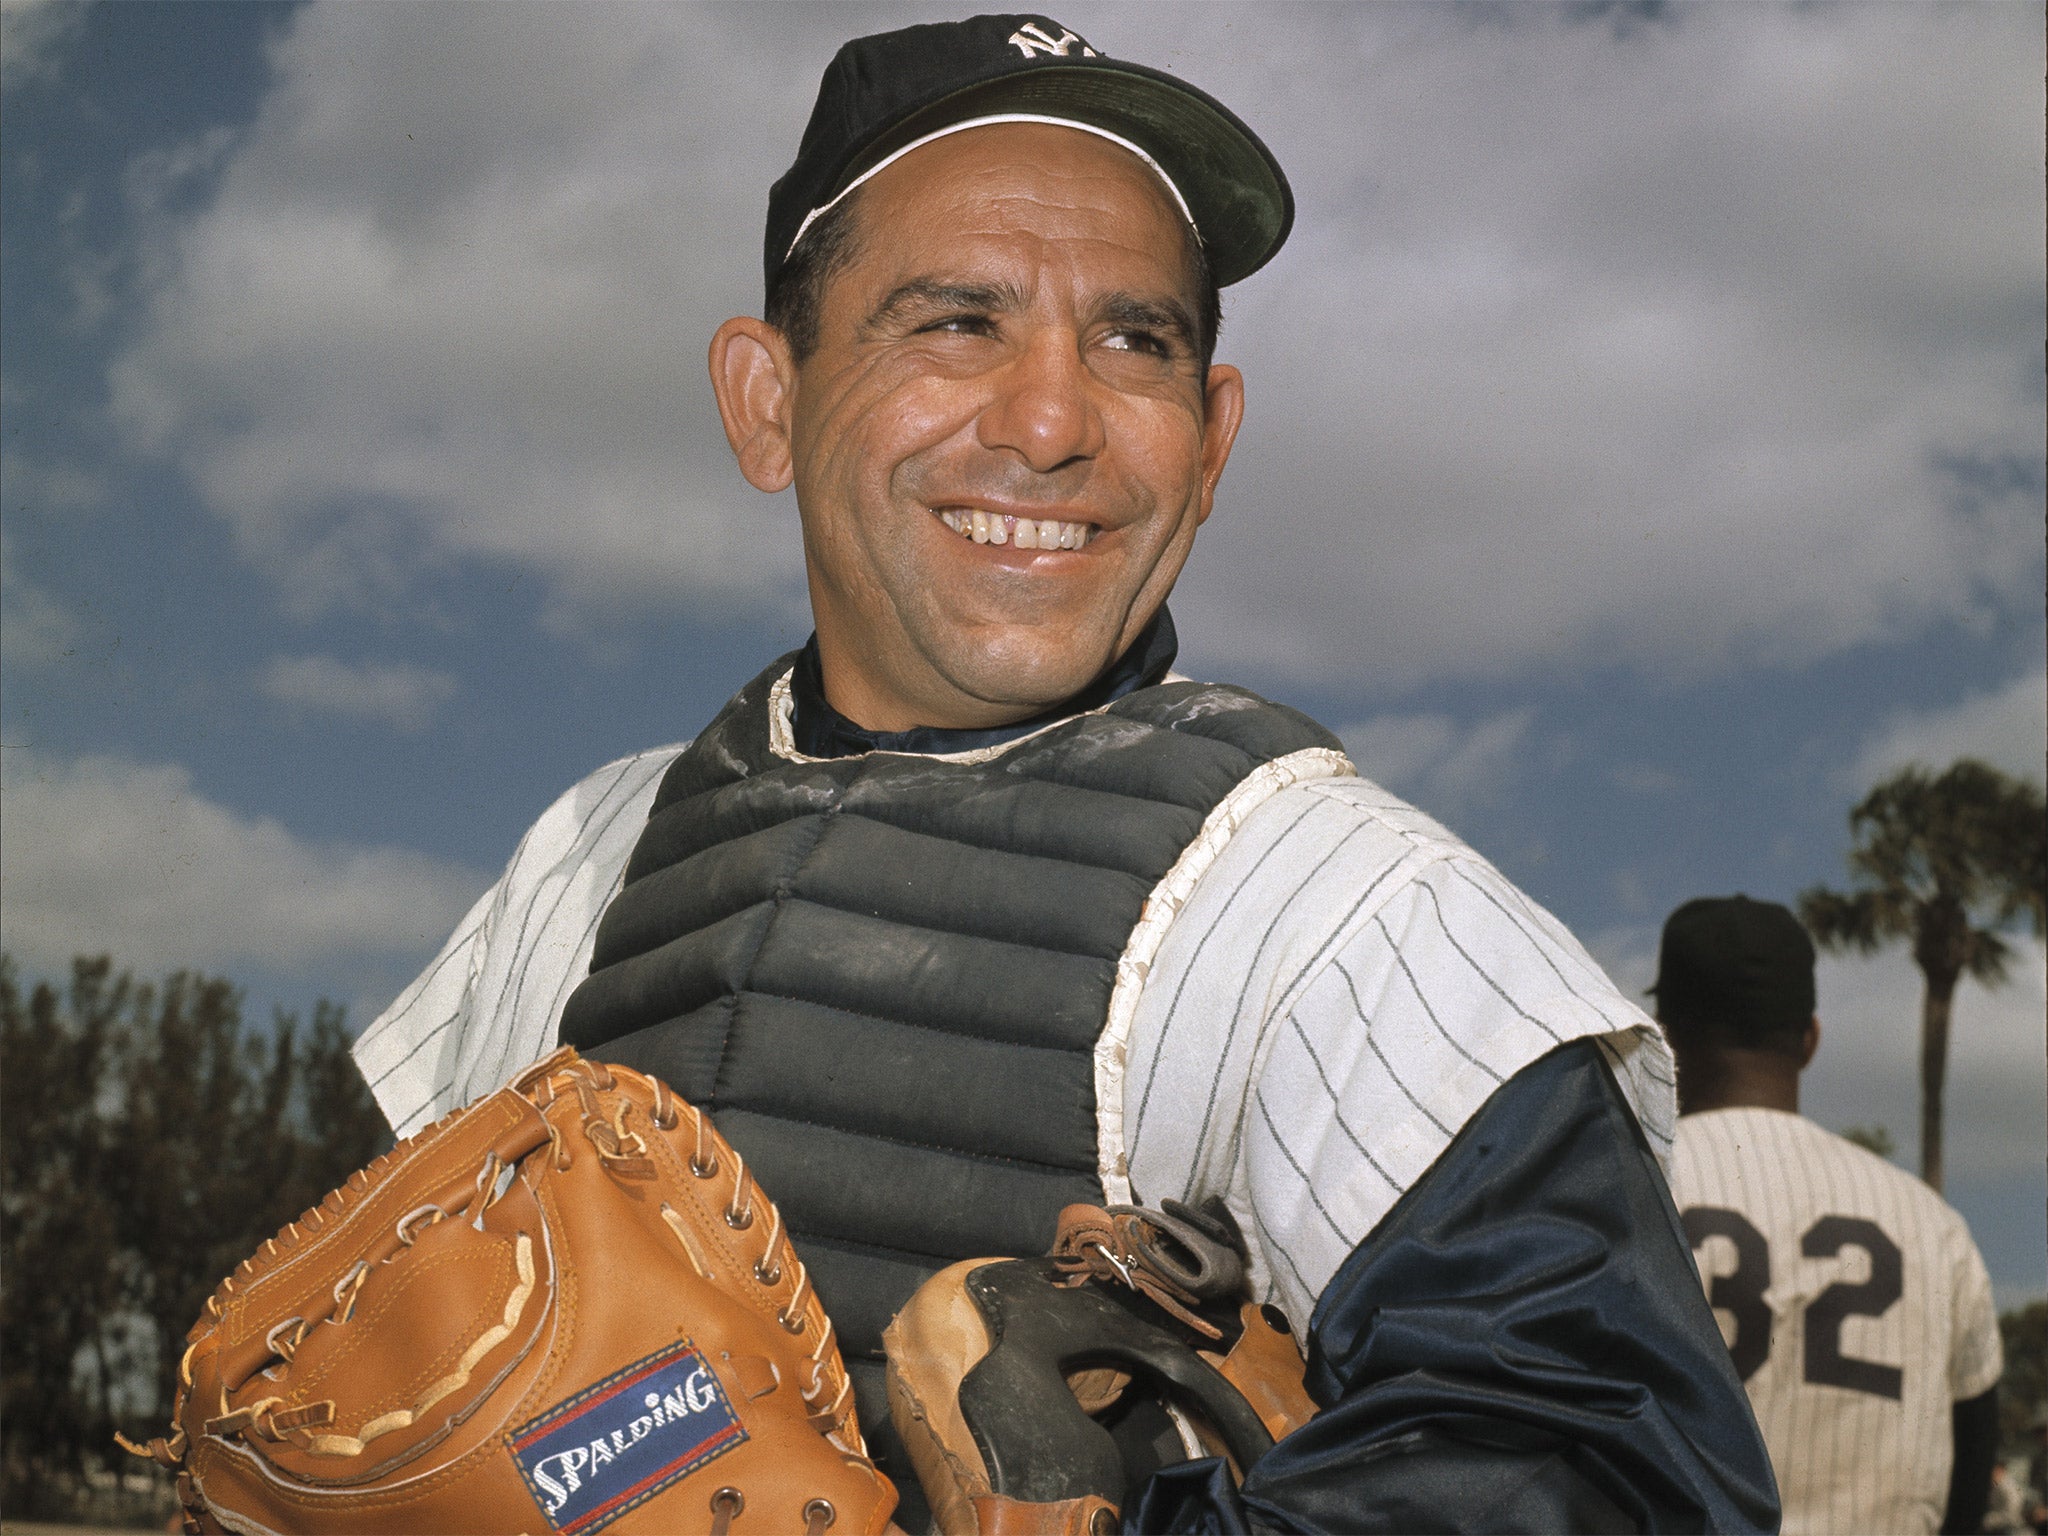 Berra won 10 World Series rings, more than any other player, including five in a row